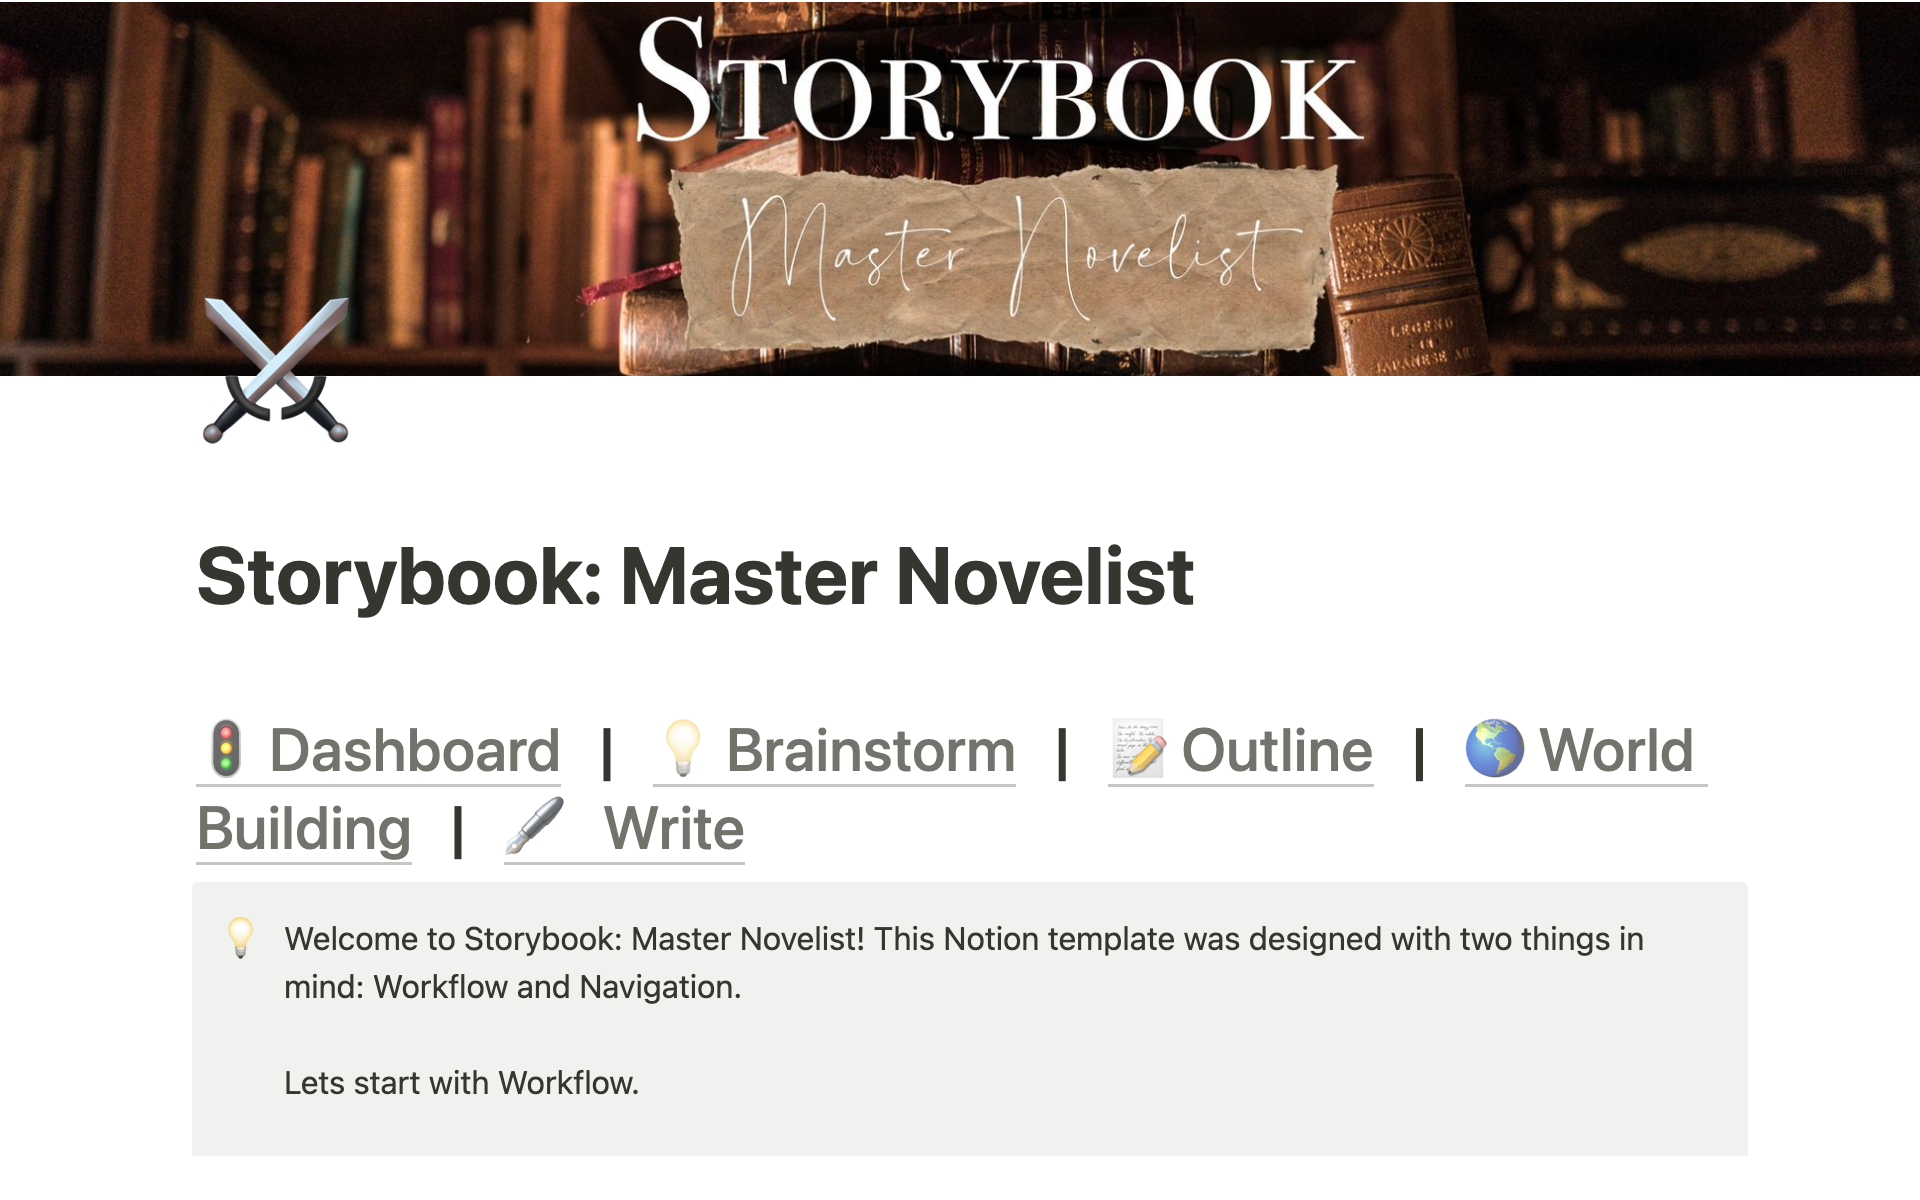 Storybook: Master Novelist is a streamlined workflow for brainstorming, outlining and writing multiple book series and books.